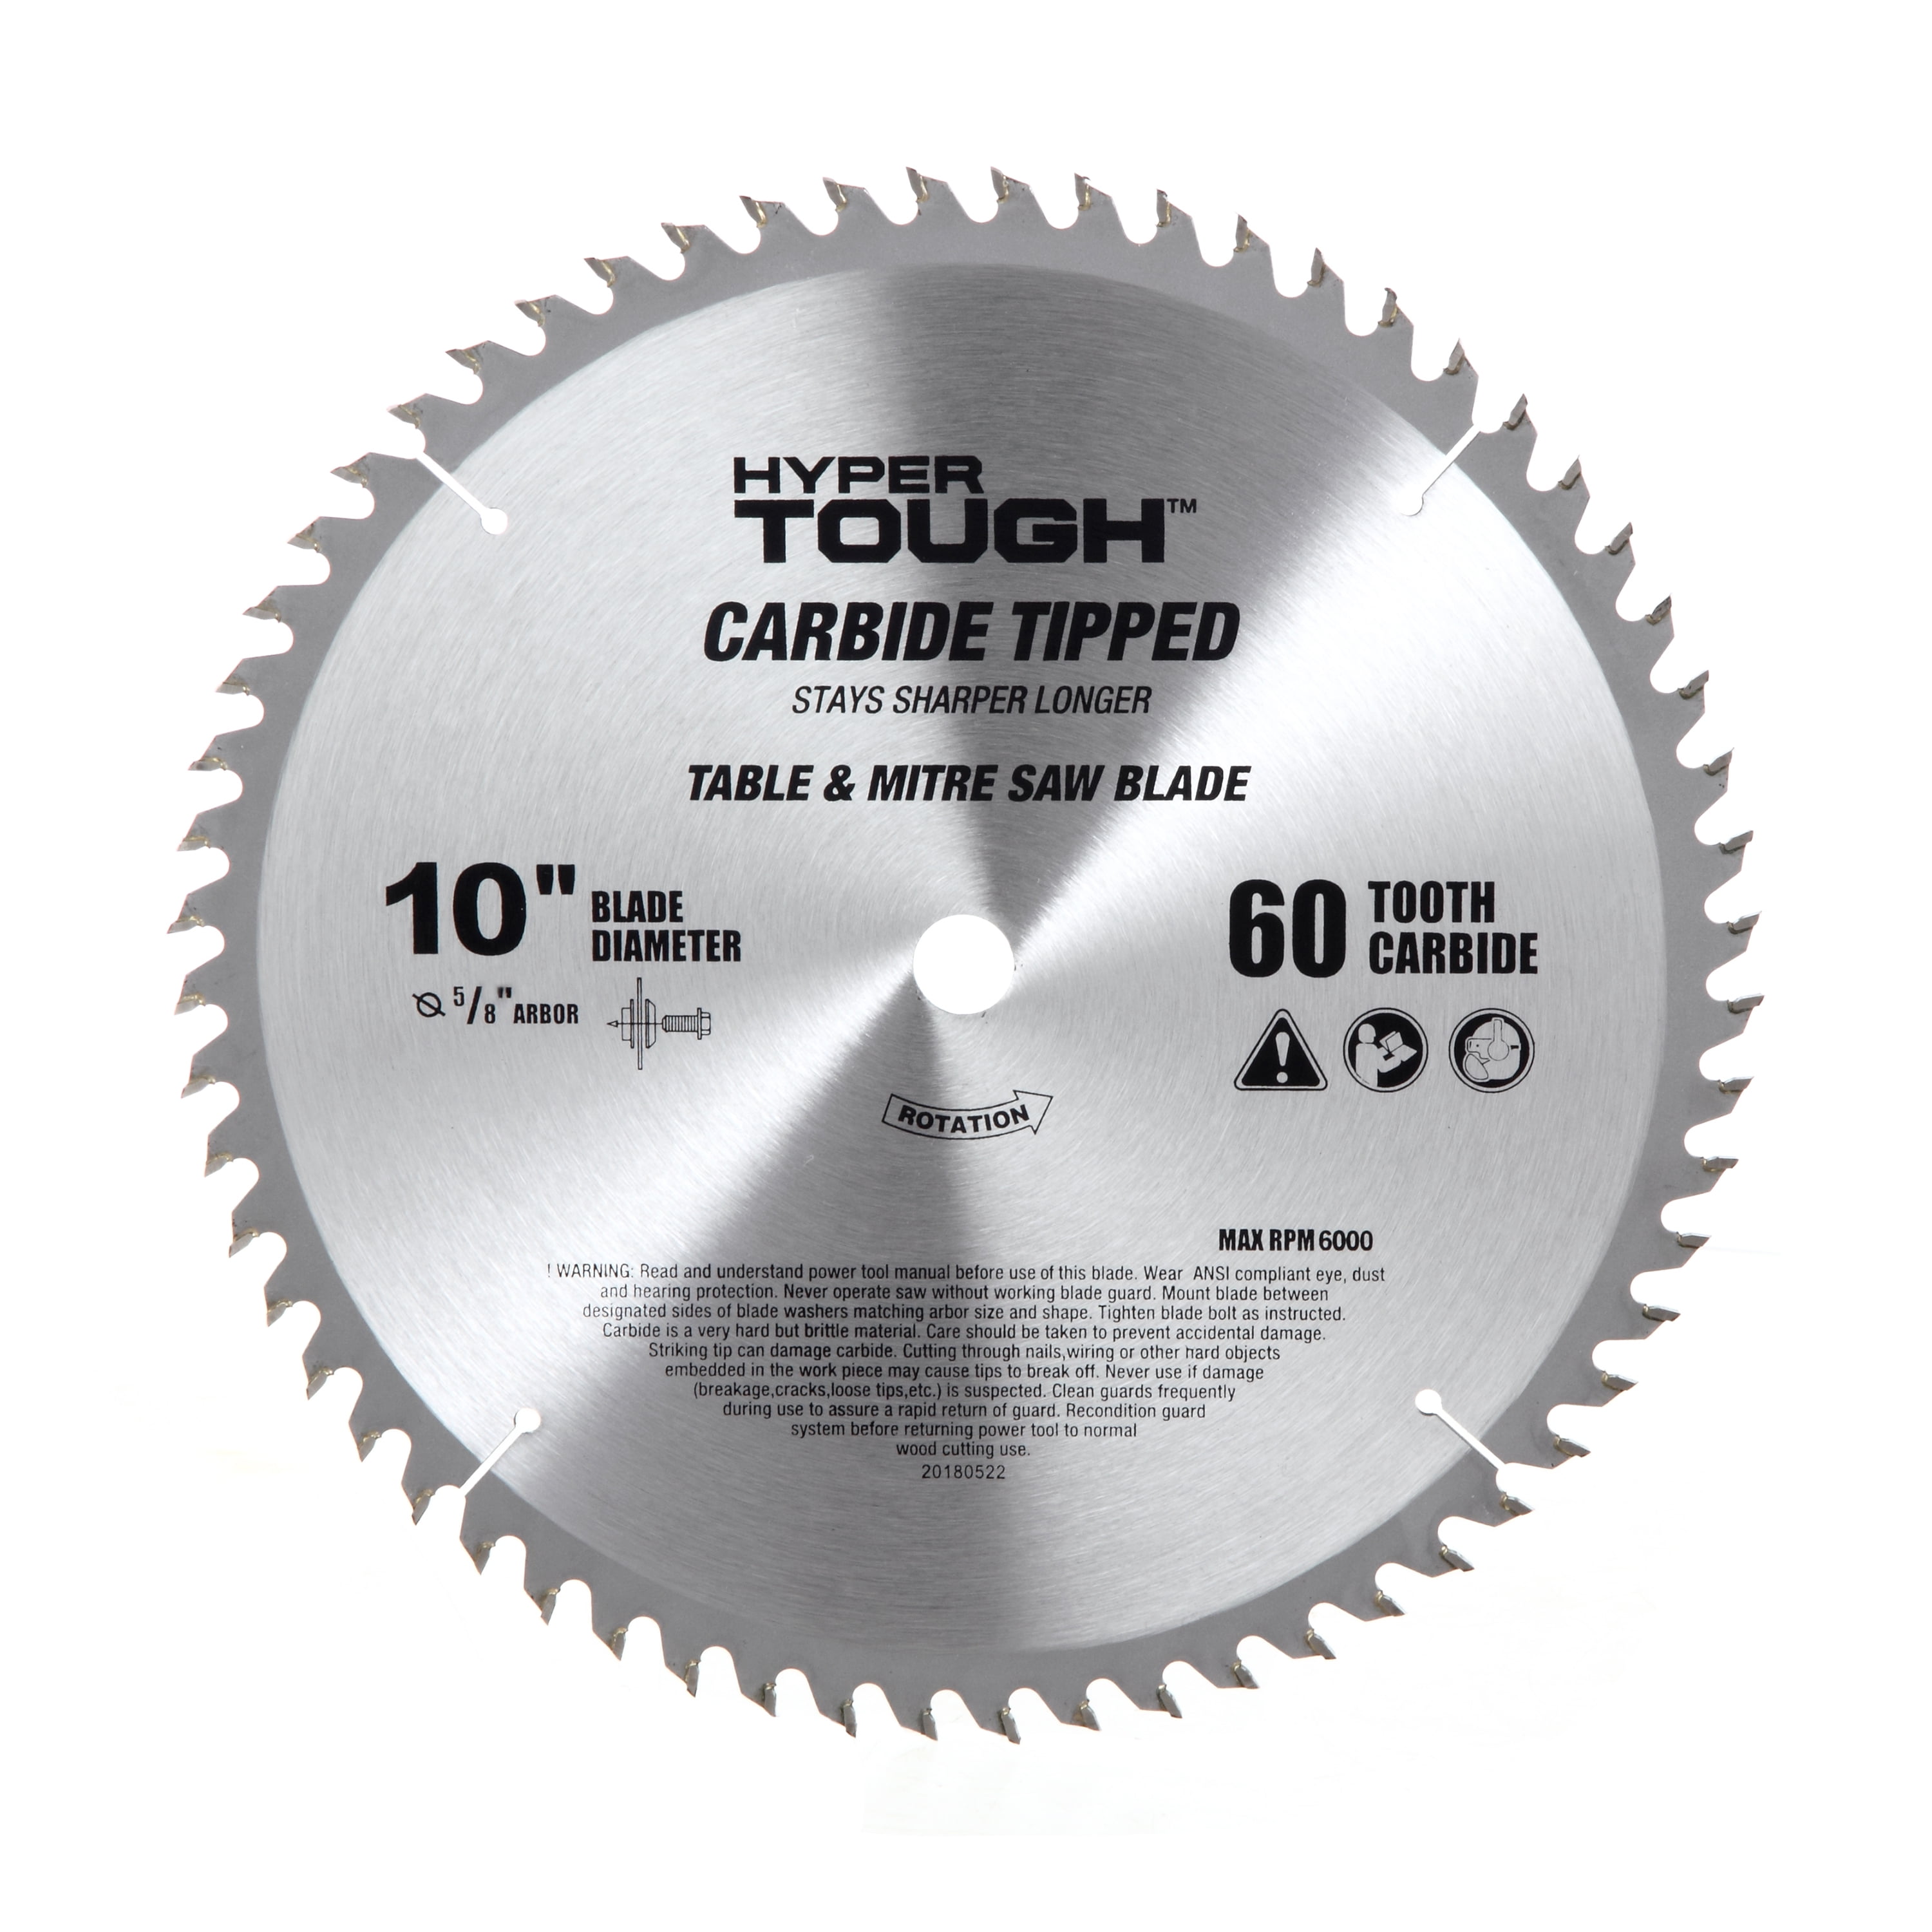 Hyper Tough 10 Inch Carbide Tipped 60, What Table Saw Blade To Cut Vinyl Flooring